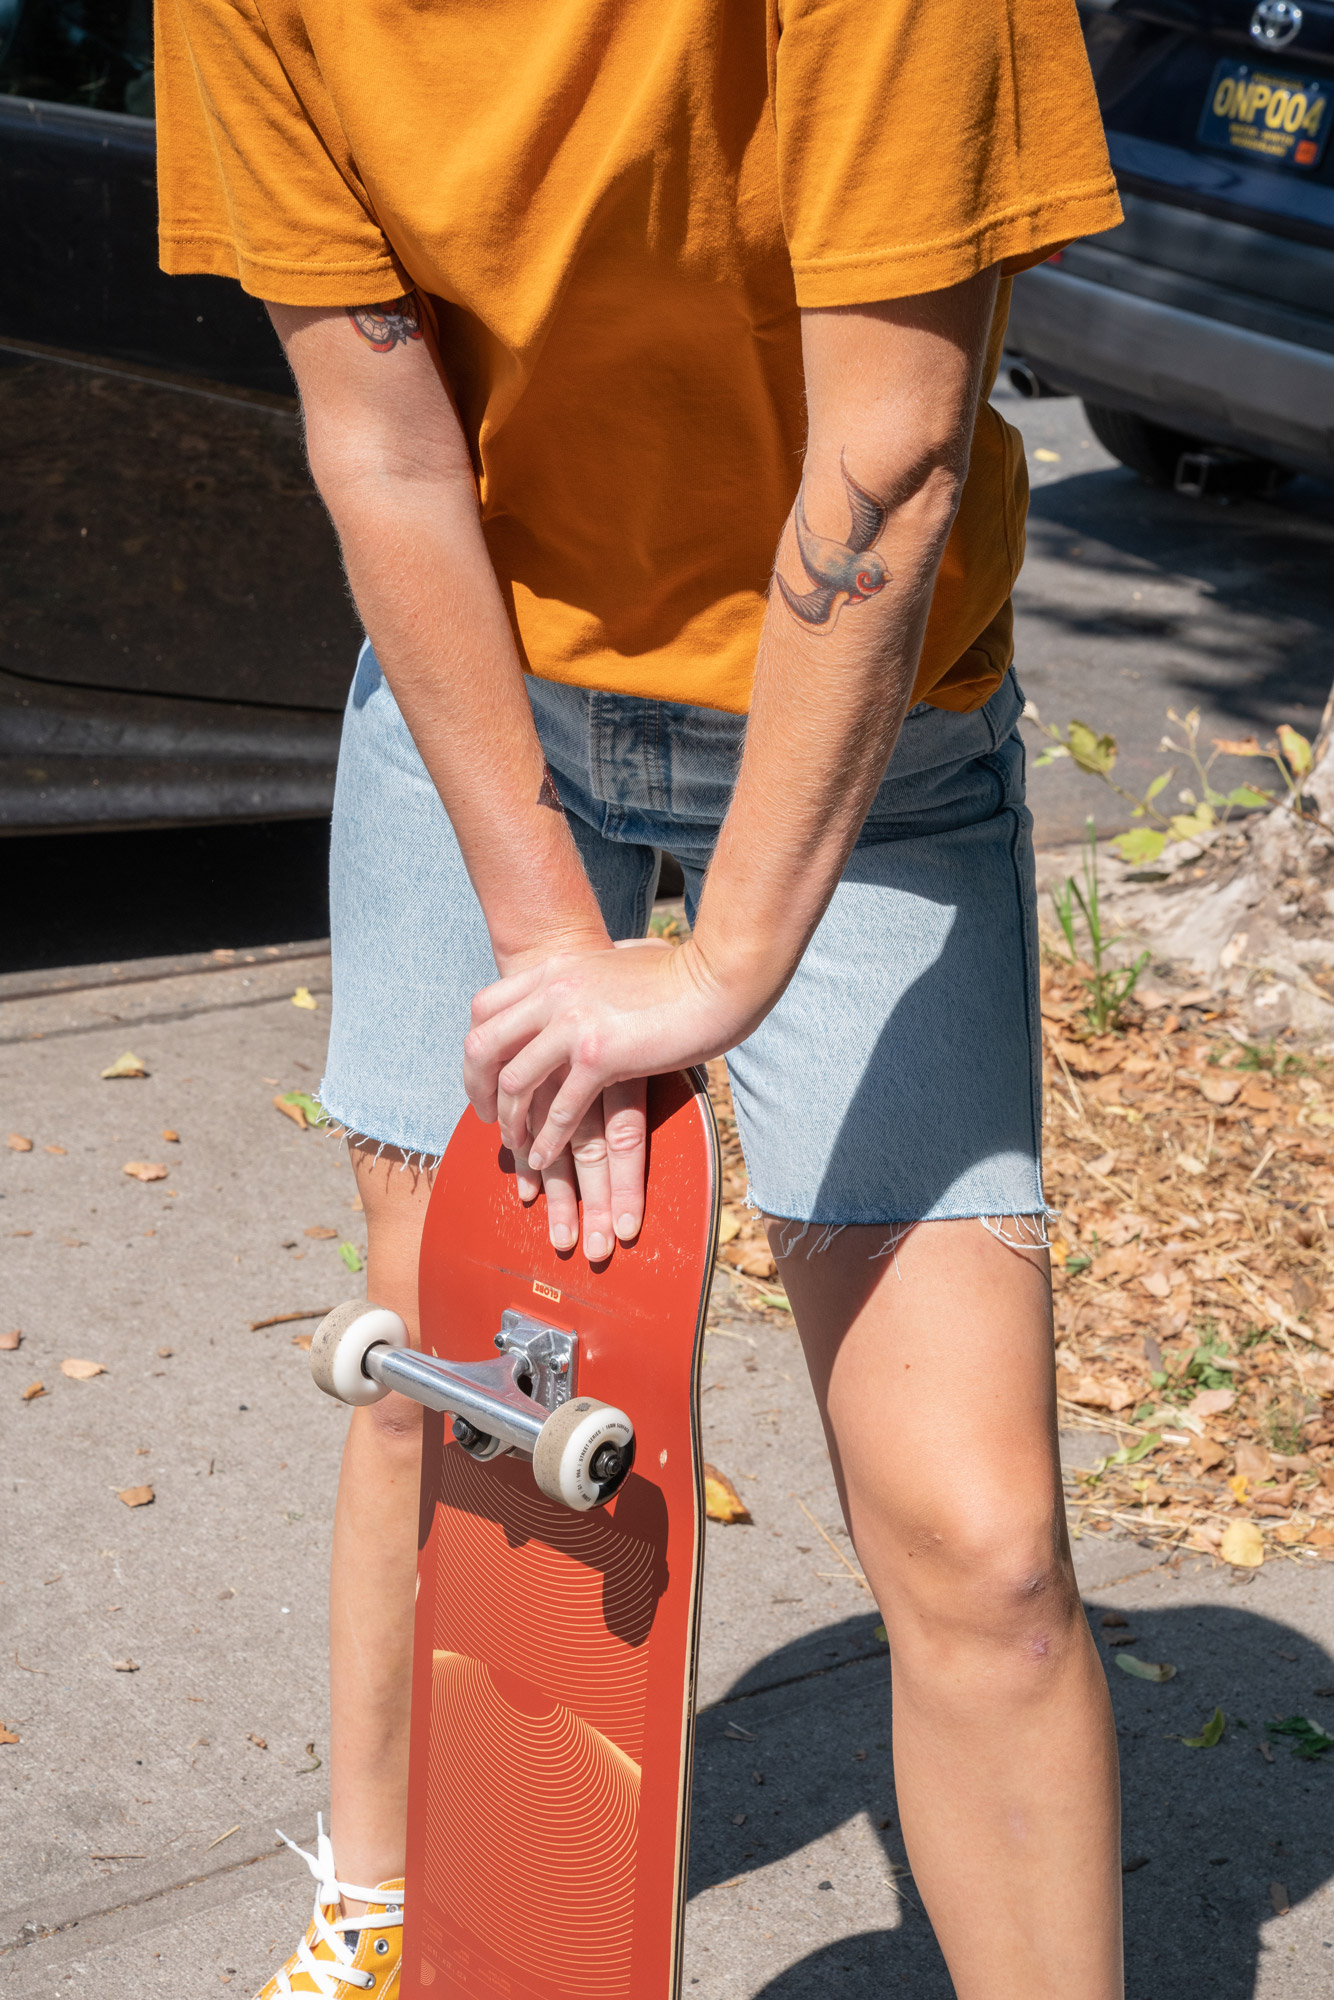 A woman leaning on her skateboard